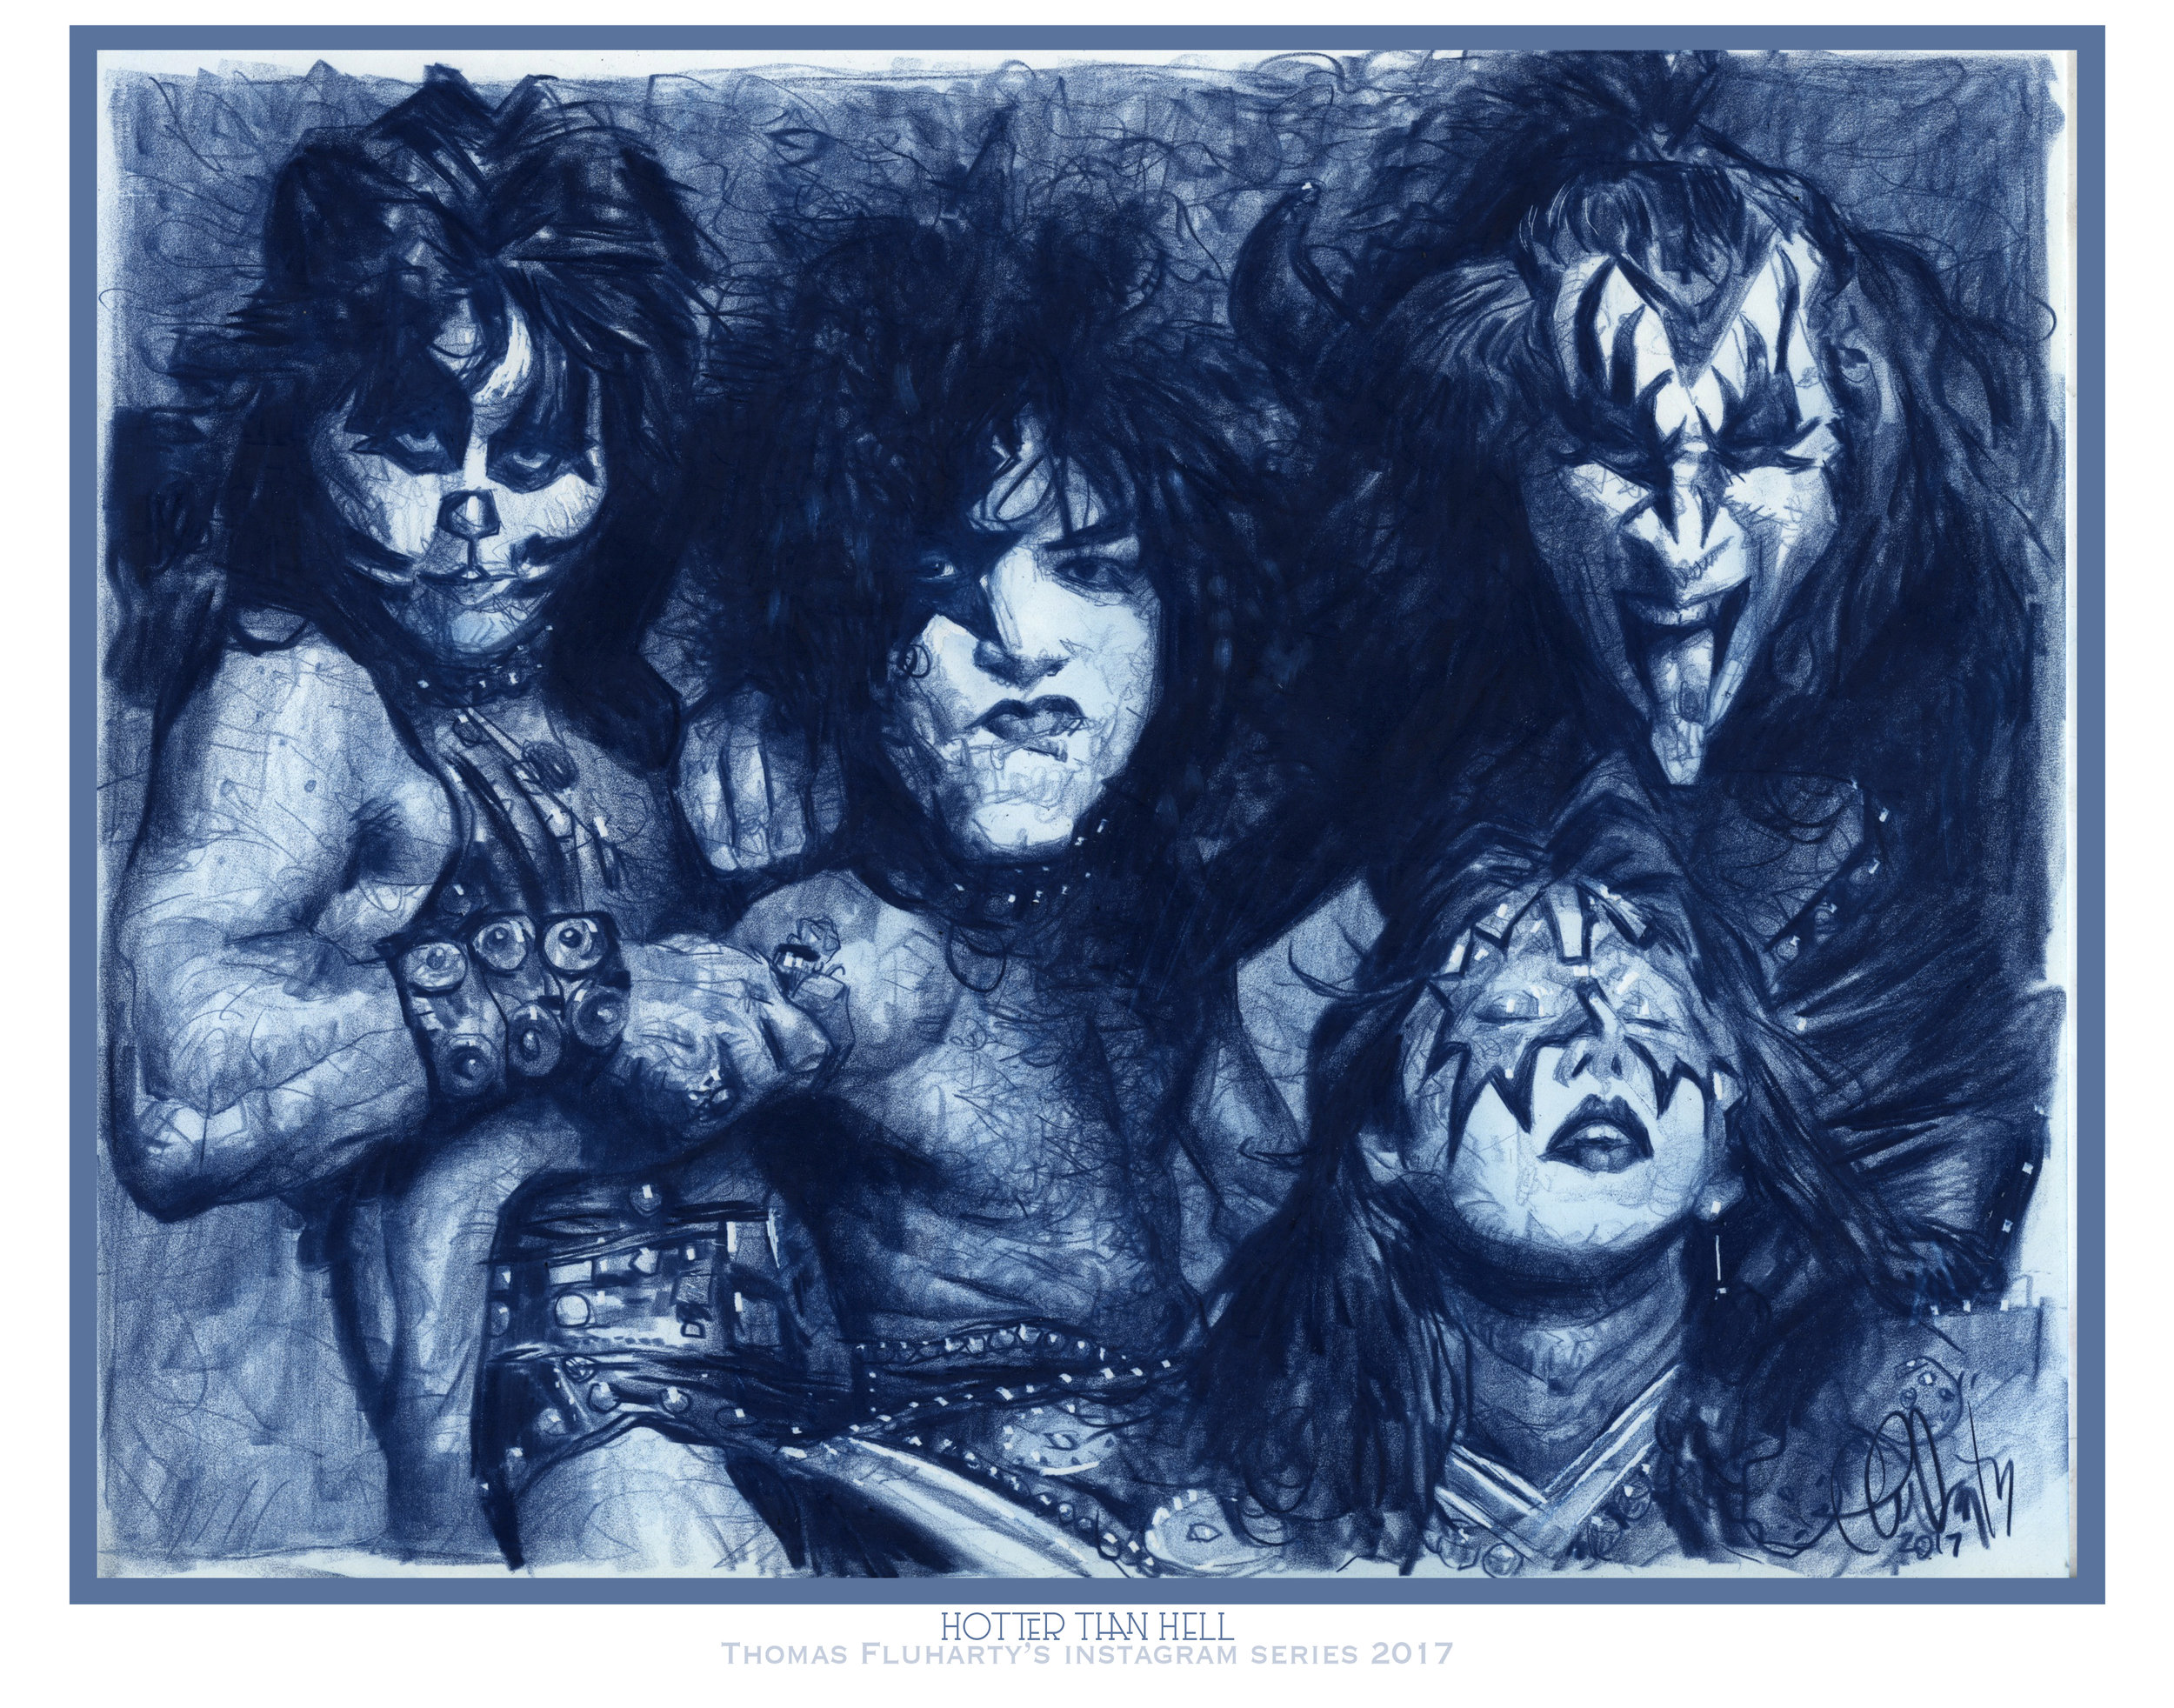 KISS-Hotter than Hell 11x14 Giclee Signed by Thomas and KISS...not really —  Thomas Fluharty